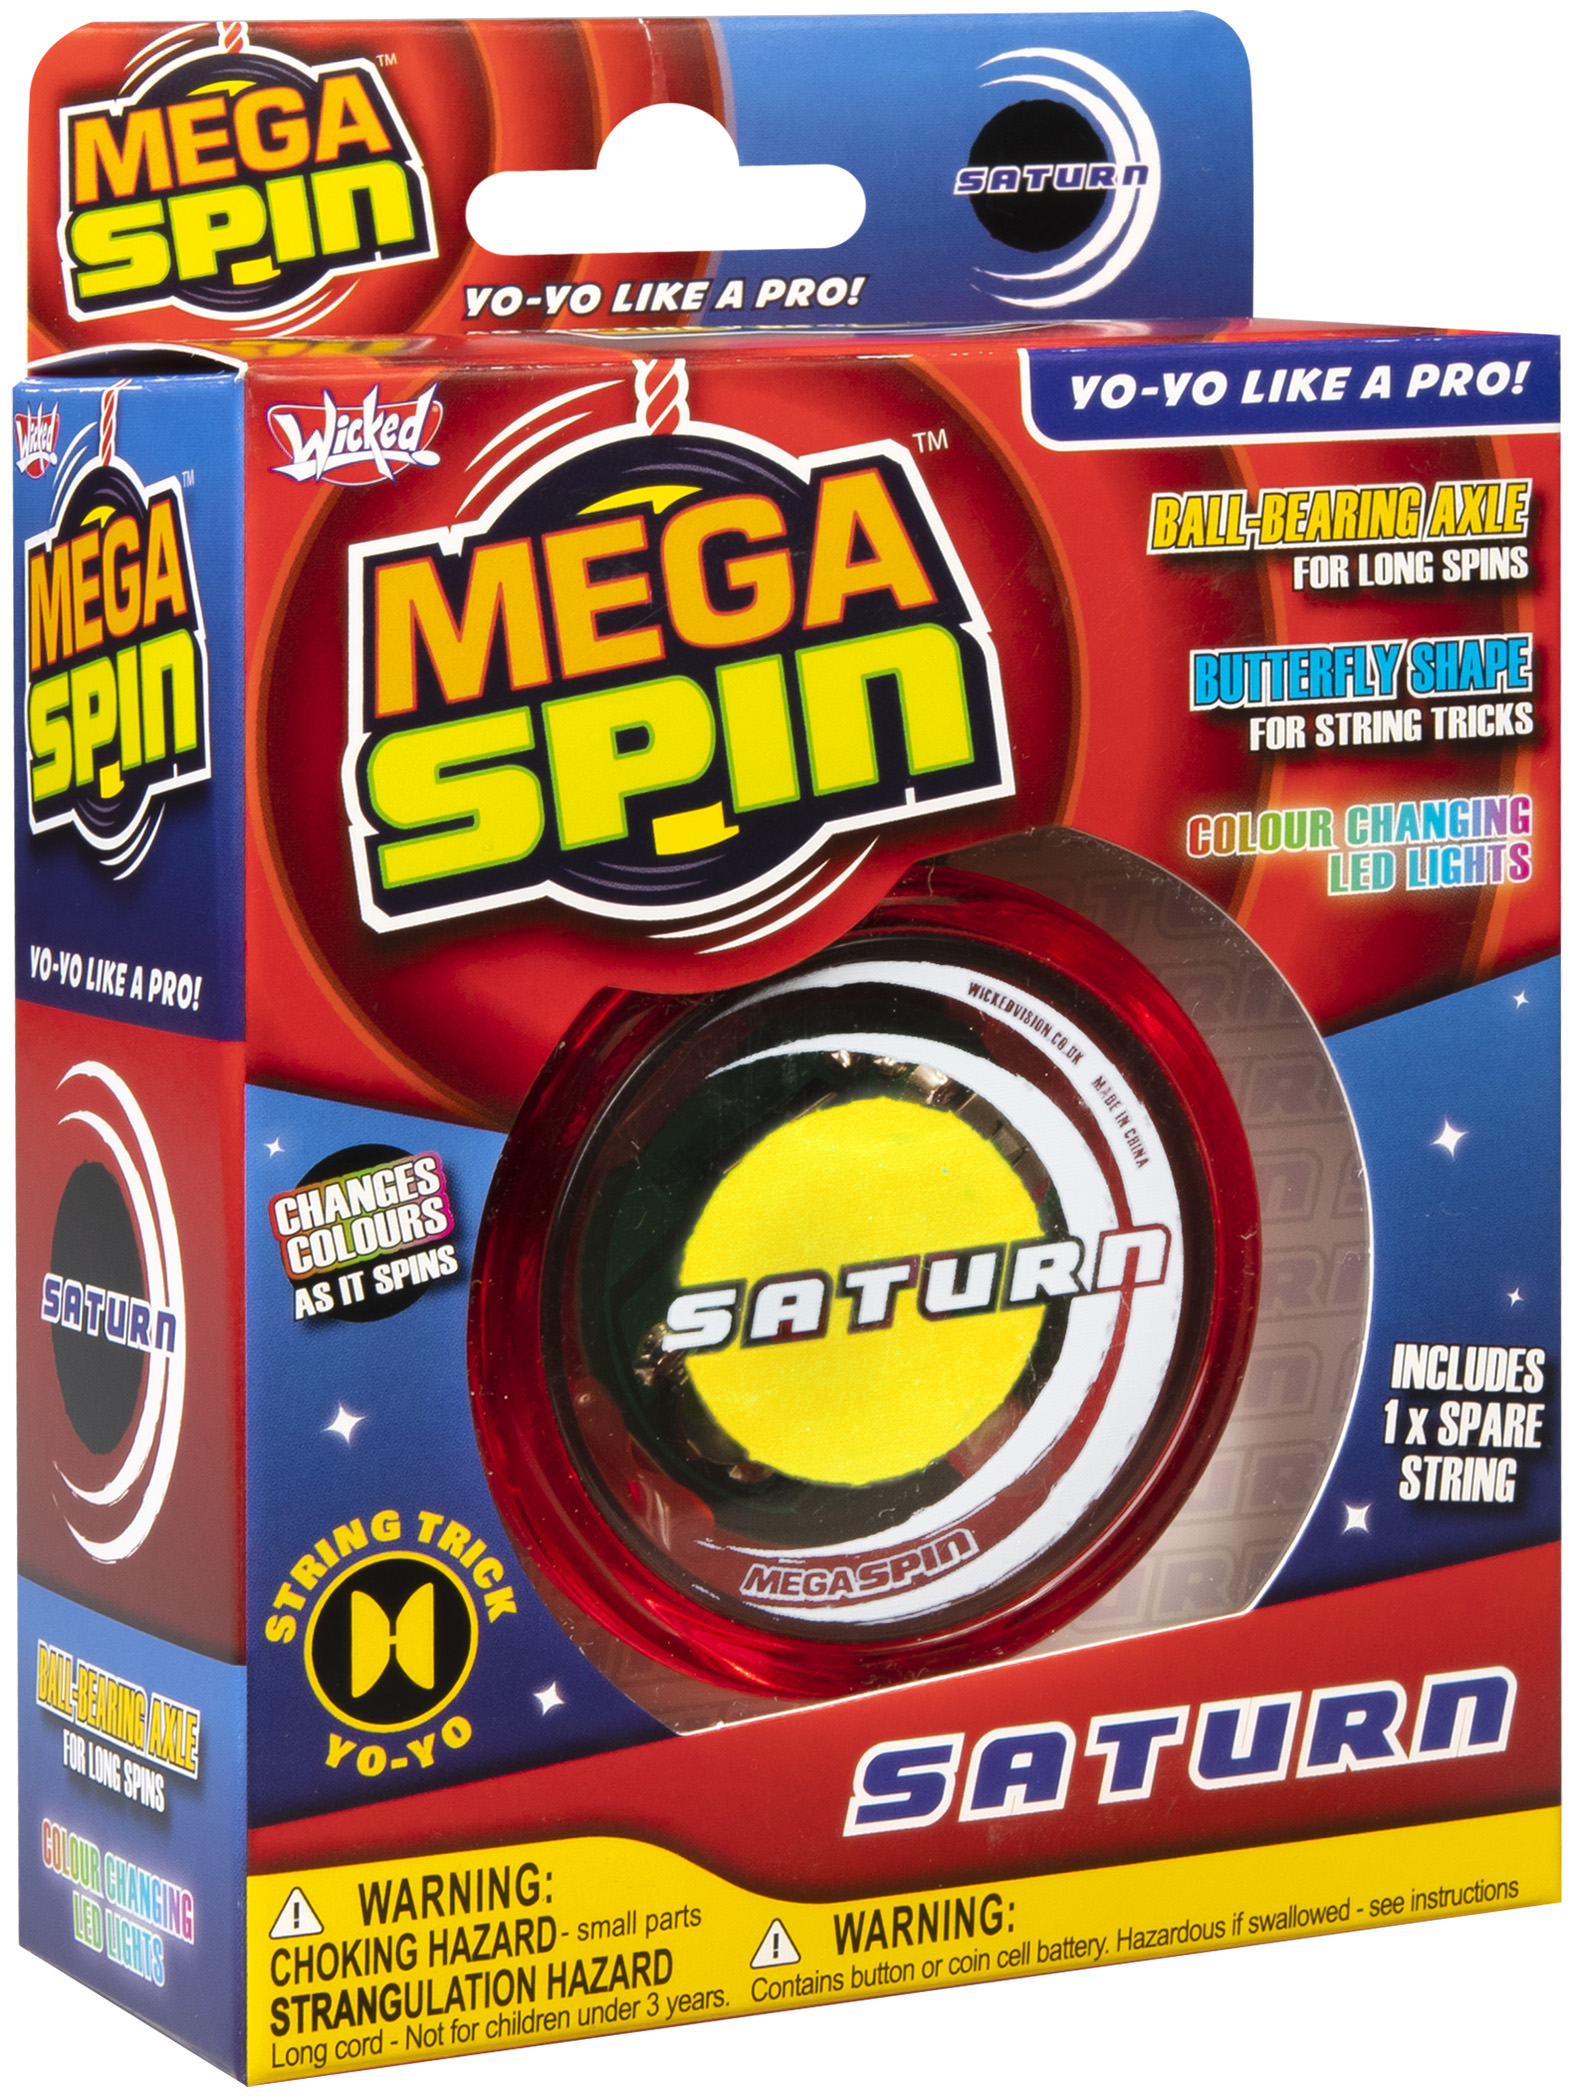 PIC 23 – Mega Spin Saturn Pack_Red with Yellow Print